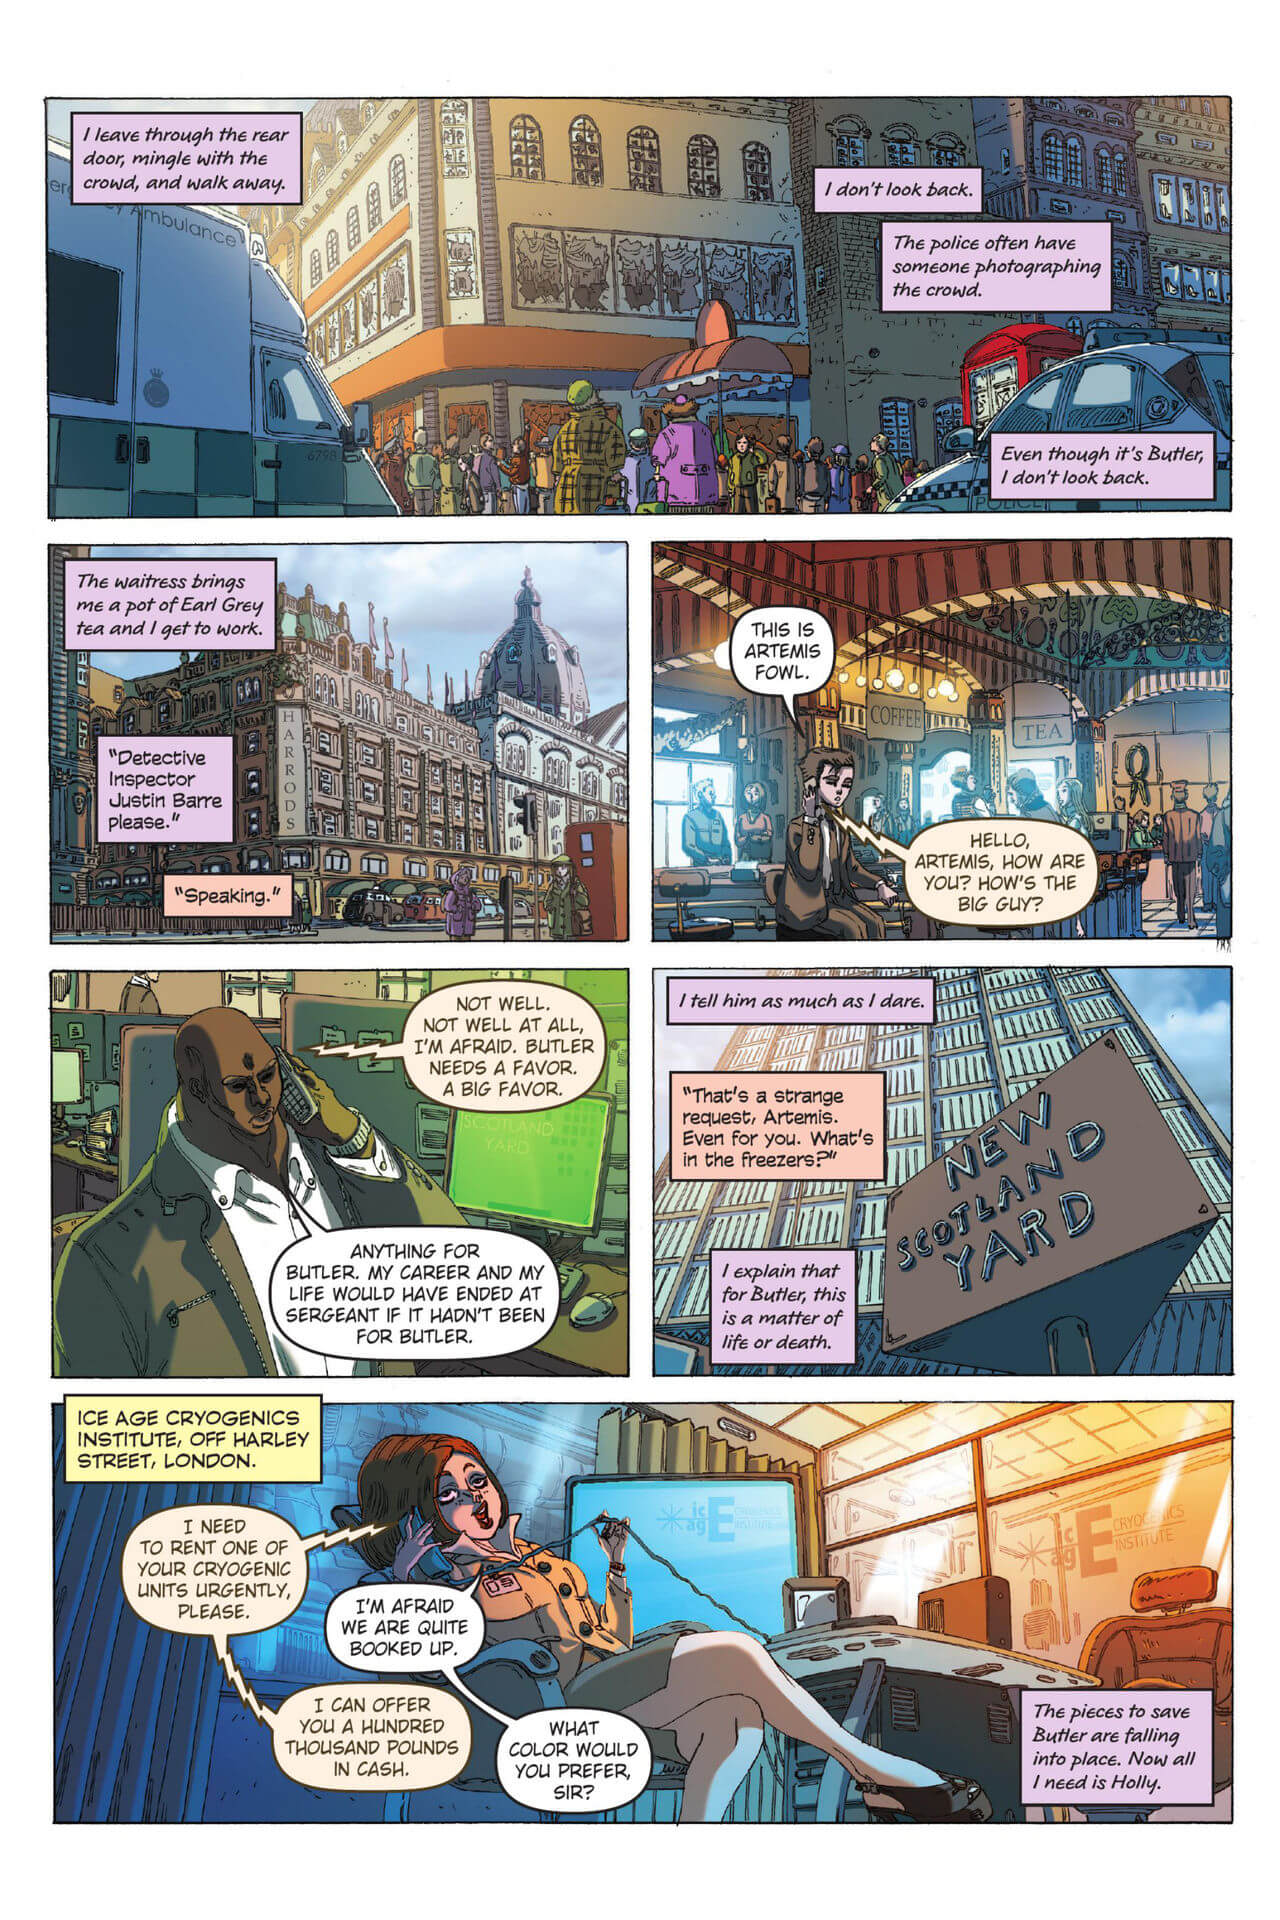 page 25 of artemis fowl eternity code graphic novel